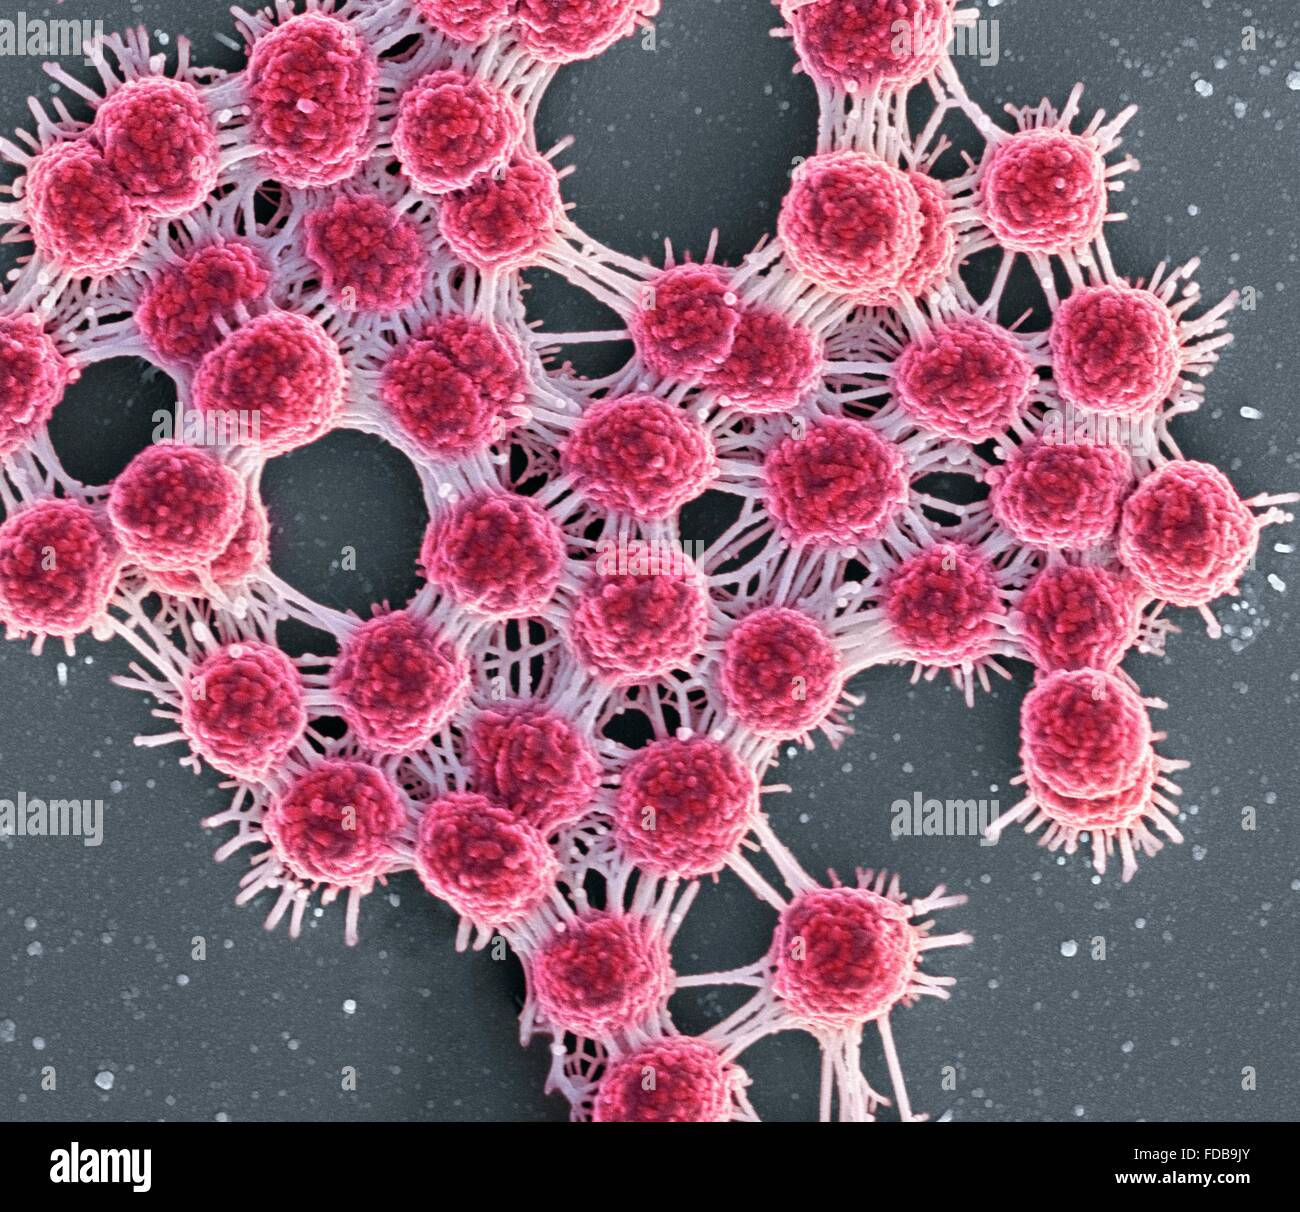 Saliva and bacteria. Coloured scanning electron micrograph (SEM) of a bacterial biofilm from saliva. This cluster of round bacteria (cocci) are linked together by stands of eDNA (extracellular deoxyribonucleic acid). The eDNA helps the biofilm to adhere to oral surfaces and contributes to antimicrobial resistance. Stock Photo